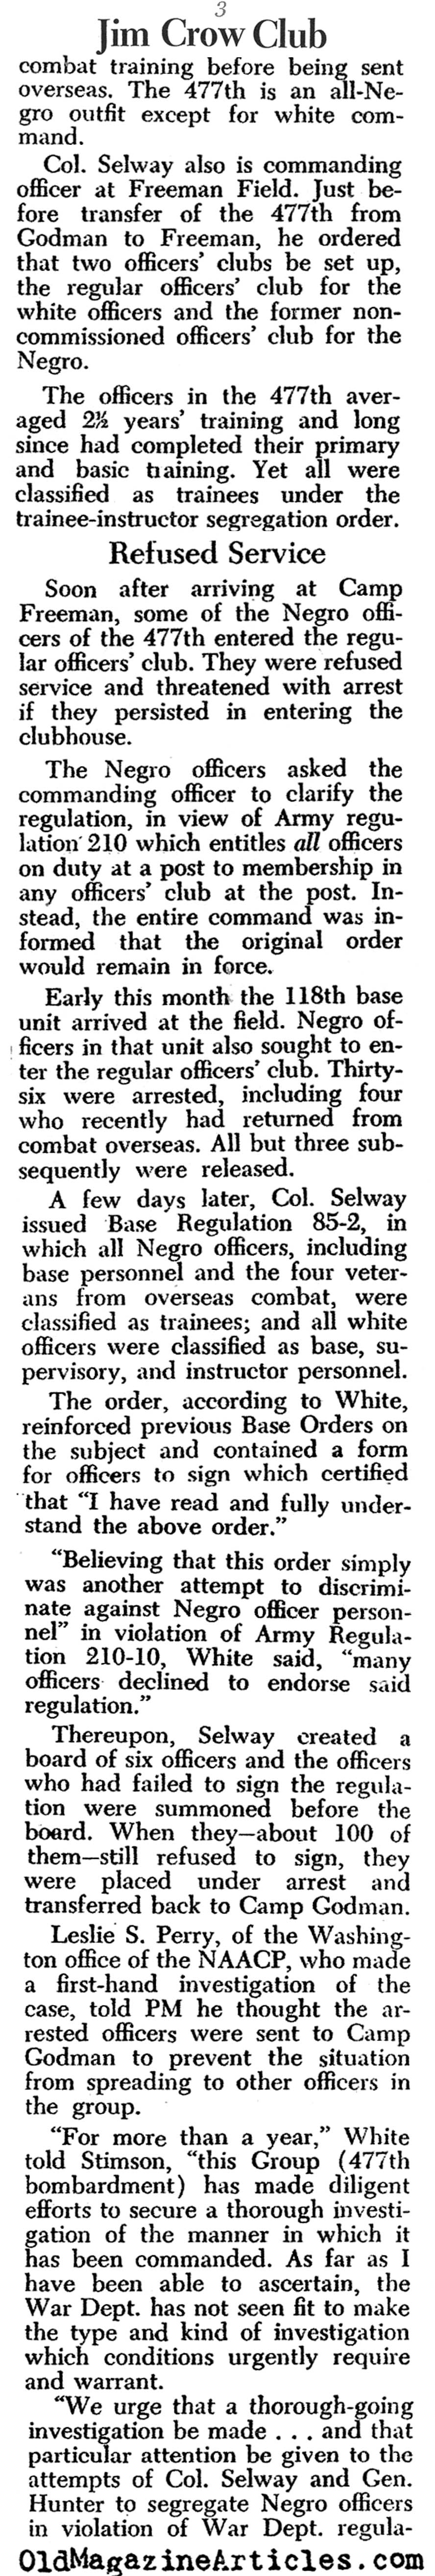 Jim Crow Officer Corps (PM Tabloid, 1945)